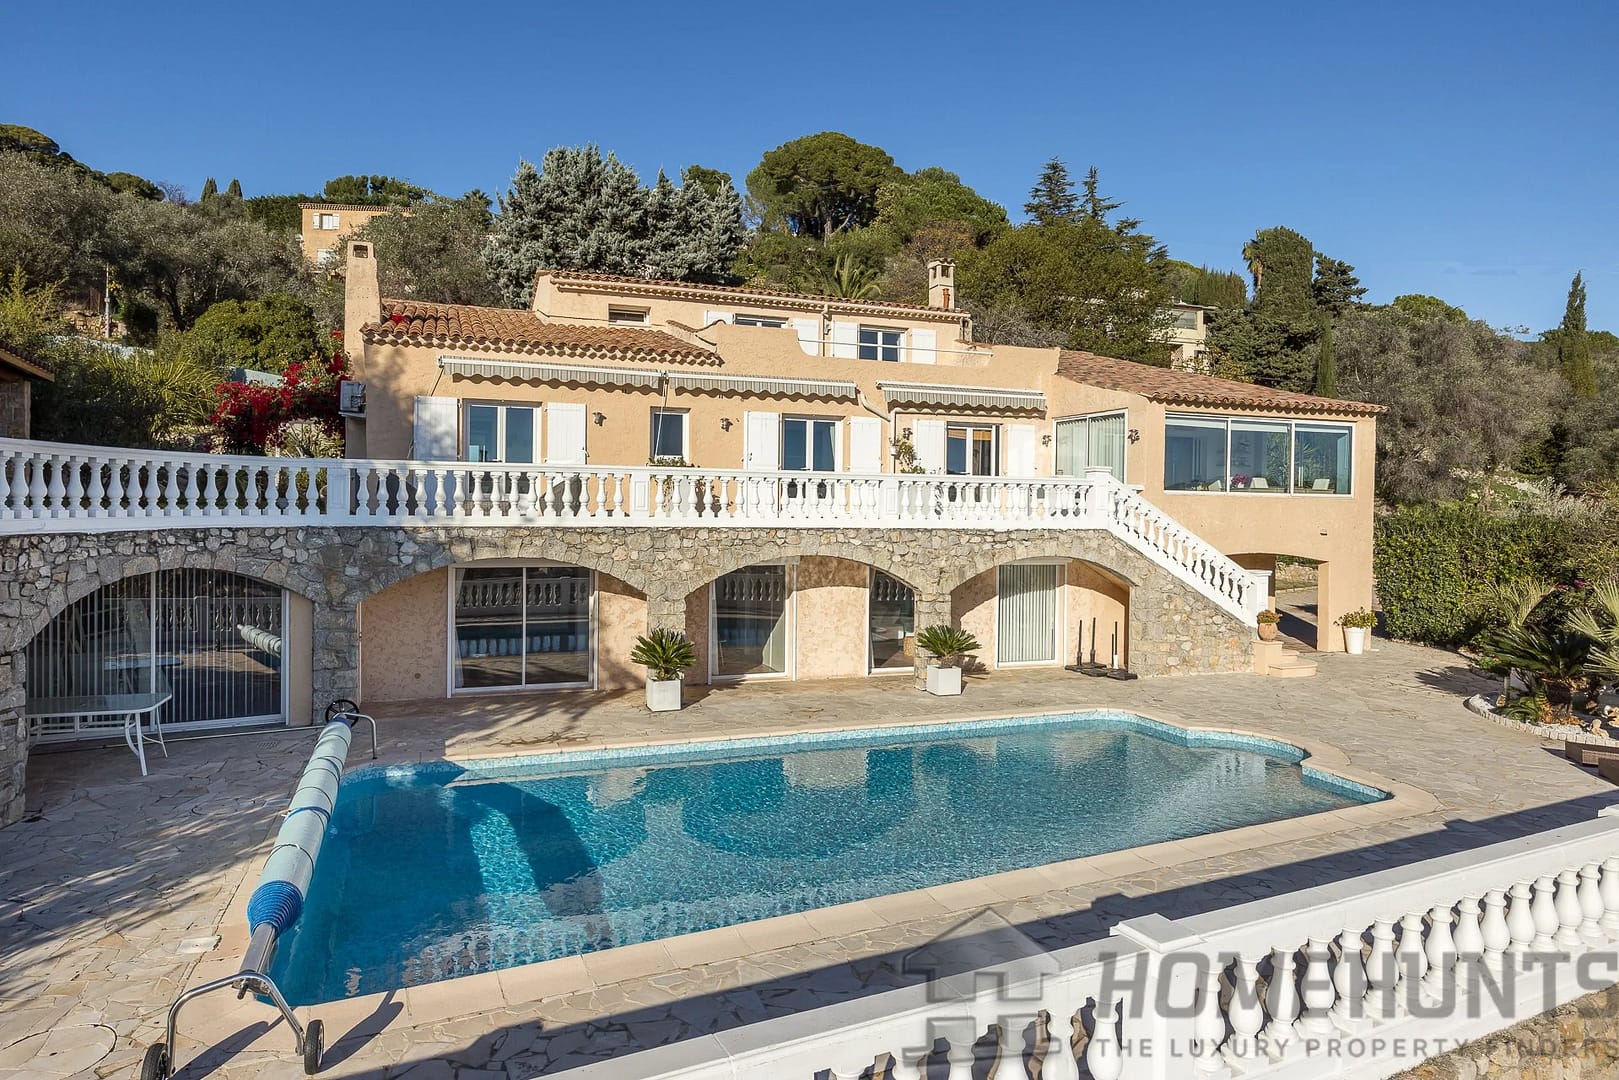 8 Bedroom Villa/House in Cannes 15